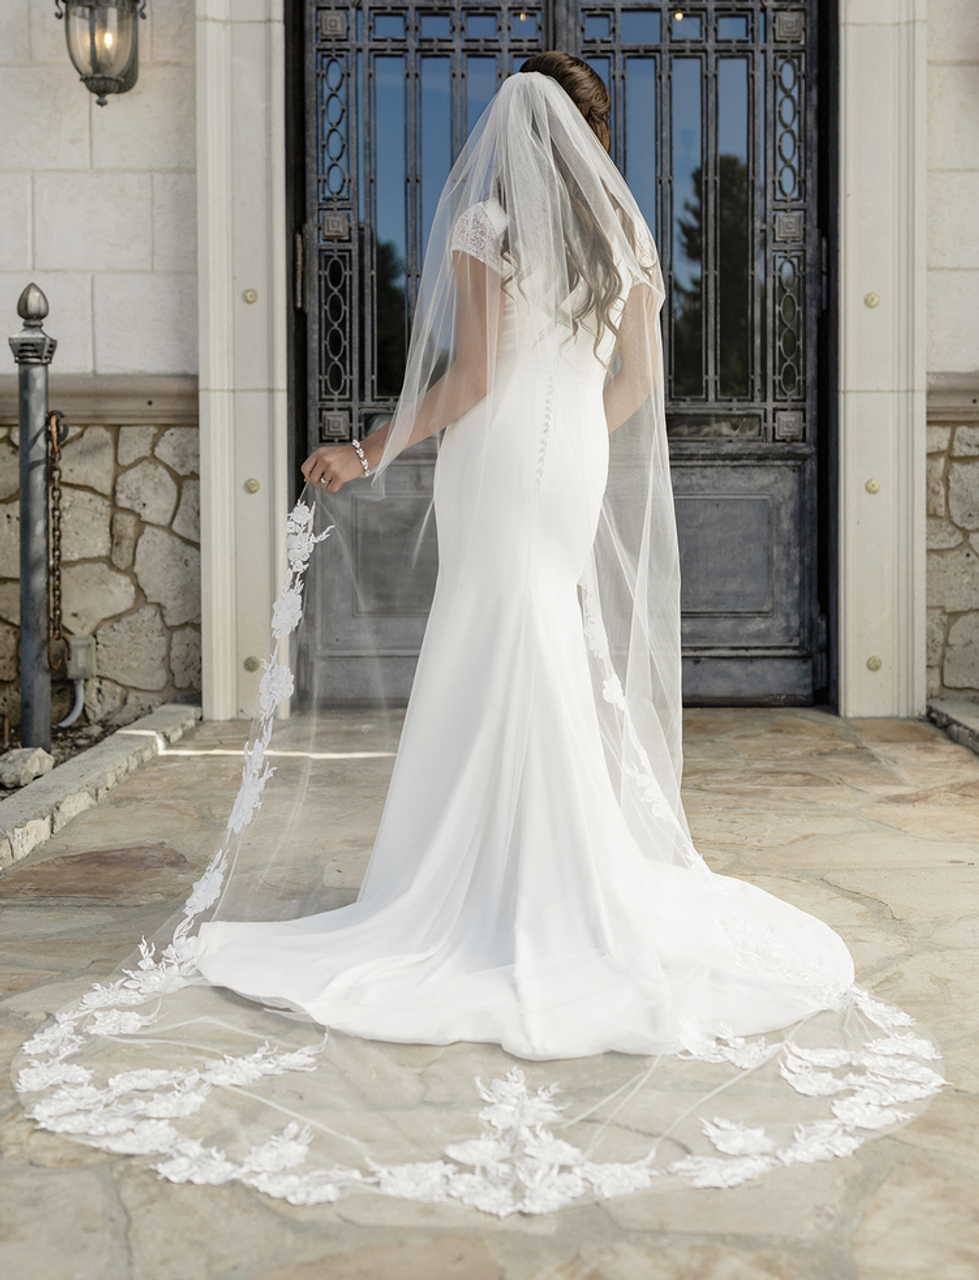 https://cdn11.bigcommerce.com/s-zb3qt33o/images/stencil/1280x1280/products/18495/56496/Cathedral-Wedding-Veil-with-Beaded-Partial-Lace-enVogue-V2098C_42779__35324.1688180988.png?c=2